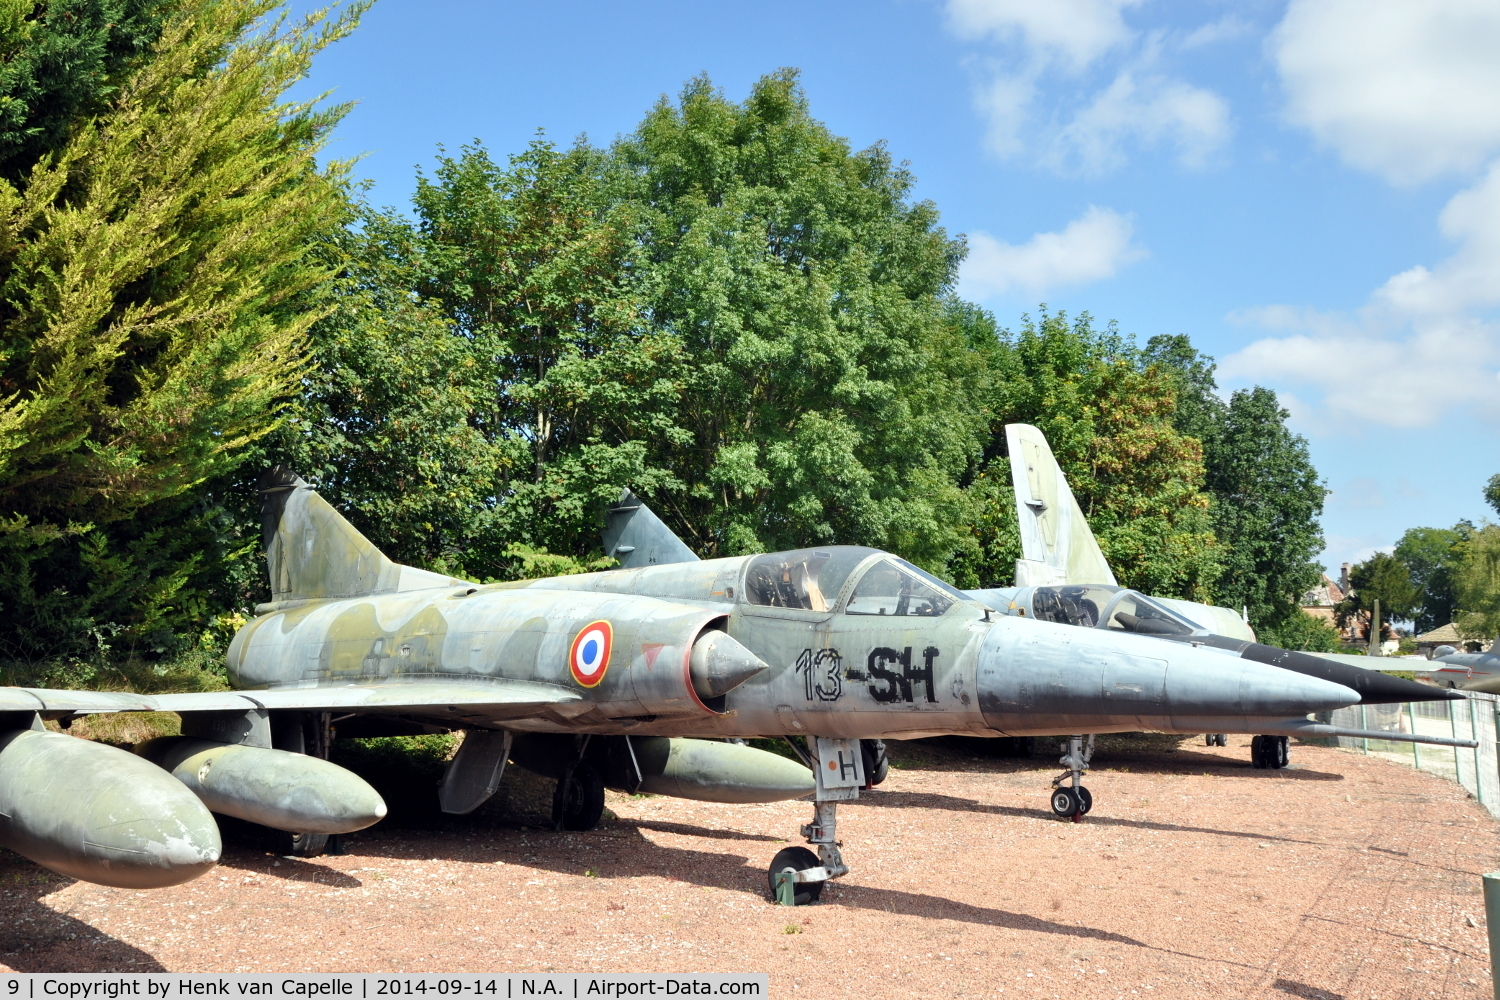 9, Dassault Mirage 5F C/N 9, Dassault Mirage 5F of the French Air Force preserved at the Chateau de Savigny aircraft museum.